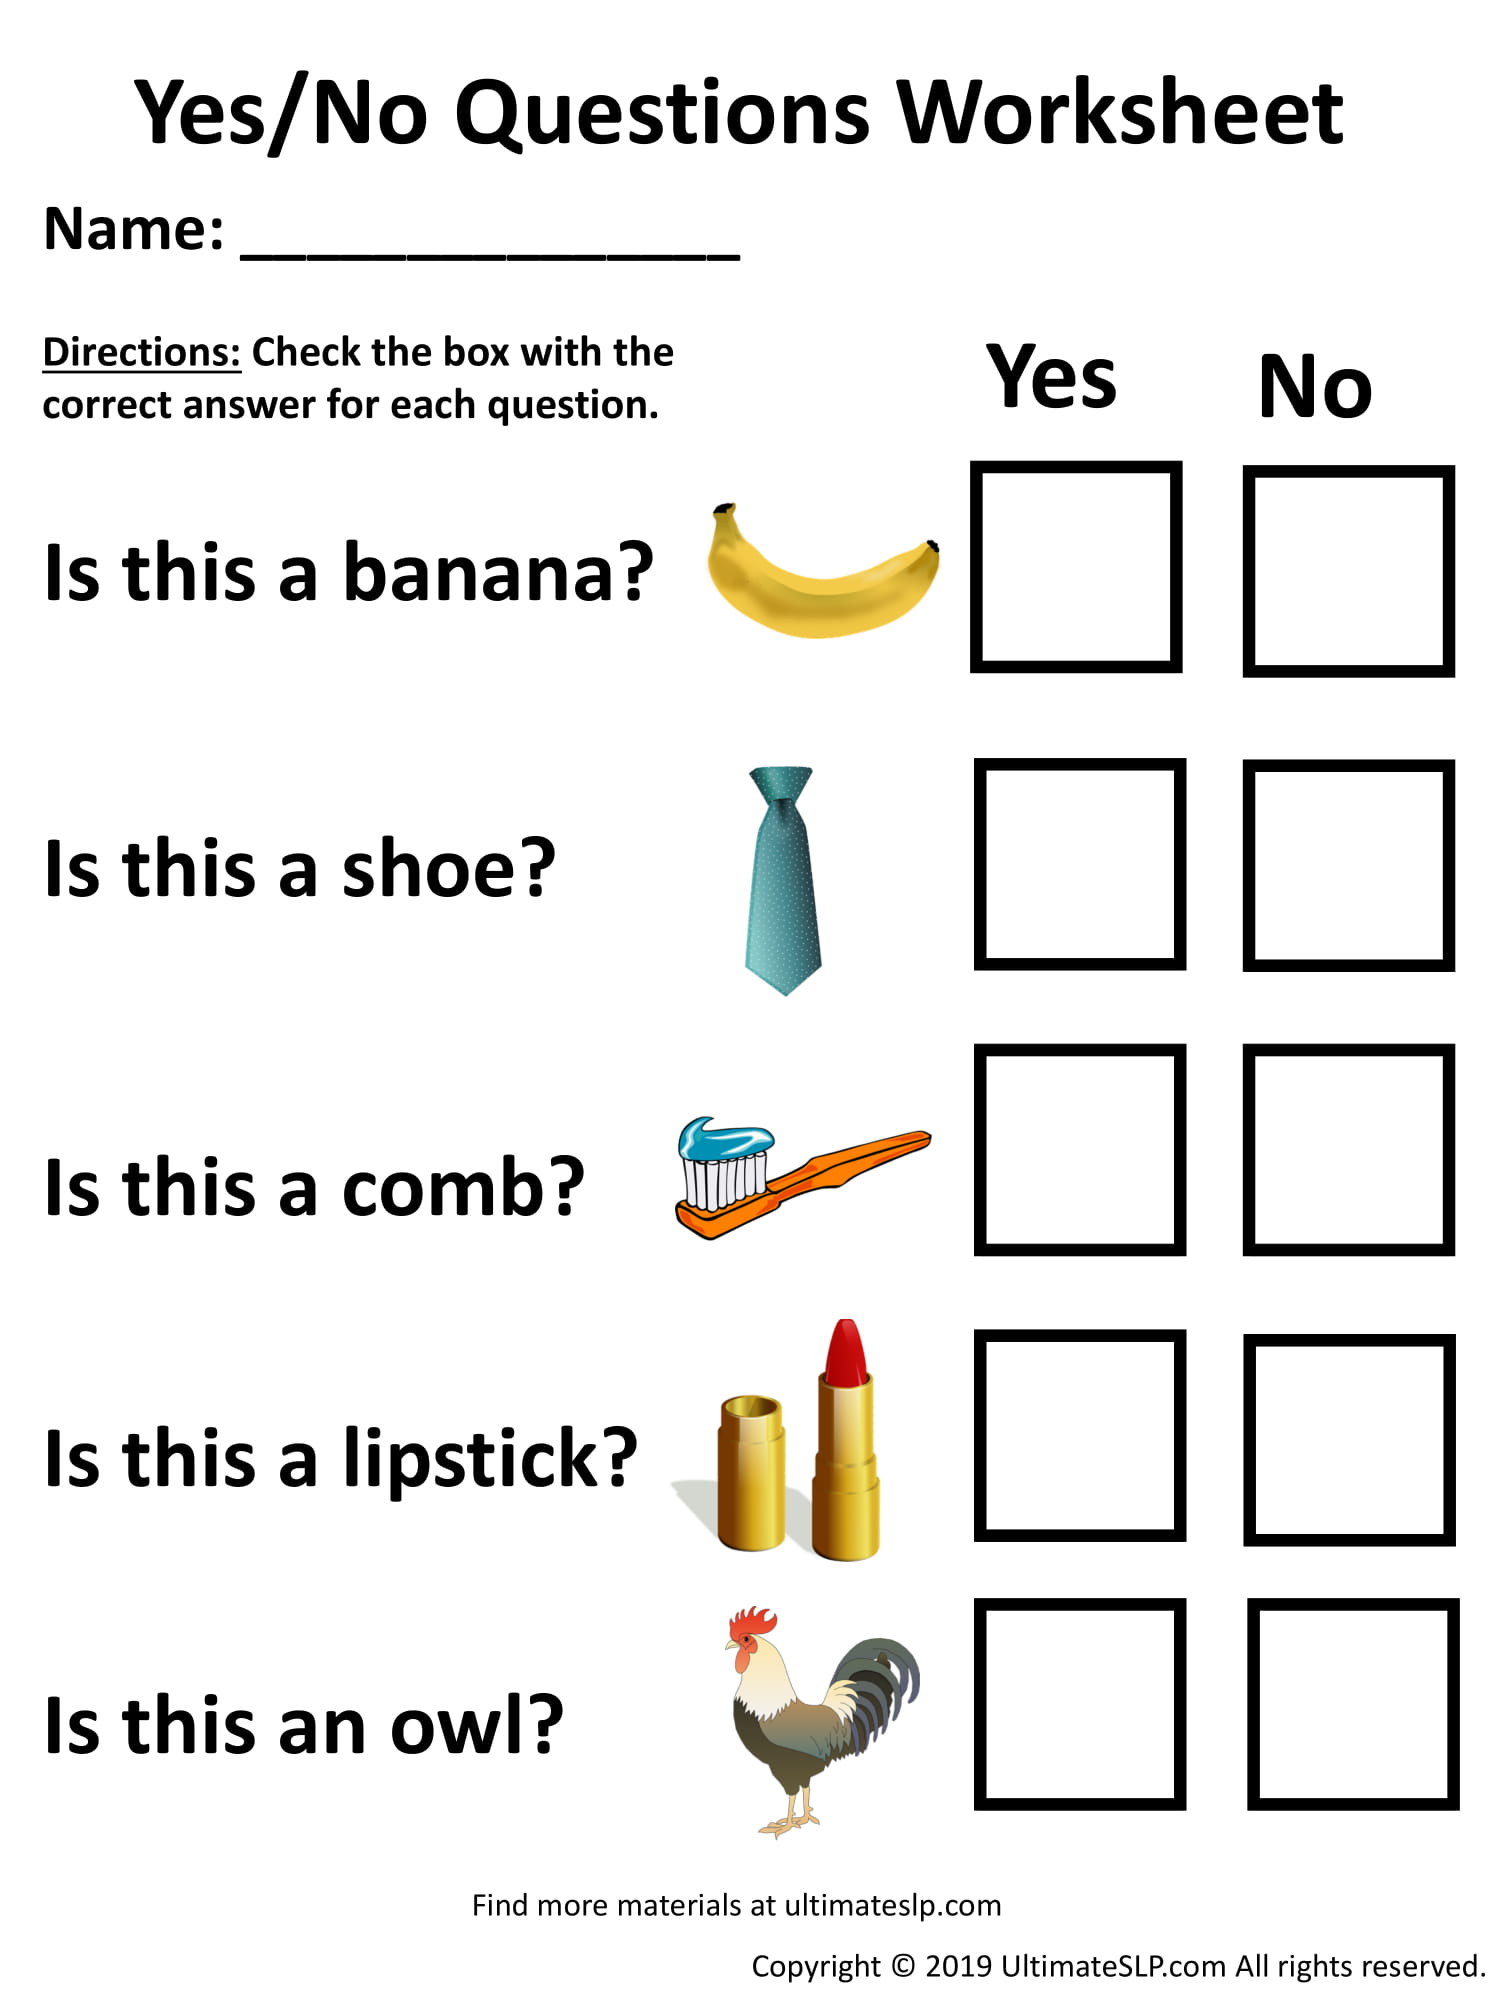 yes-or-no-questions-worksheet-ultimate-slp